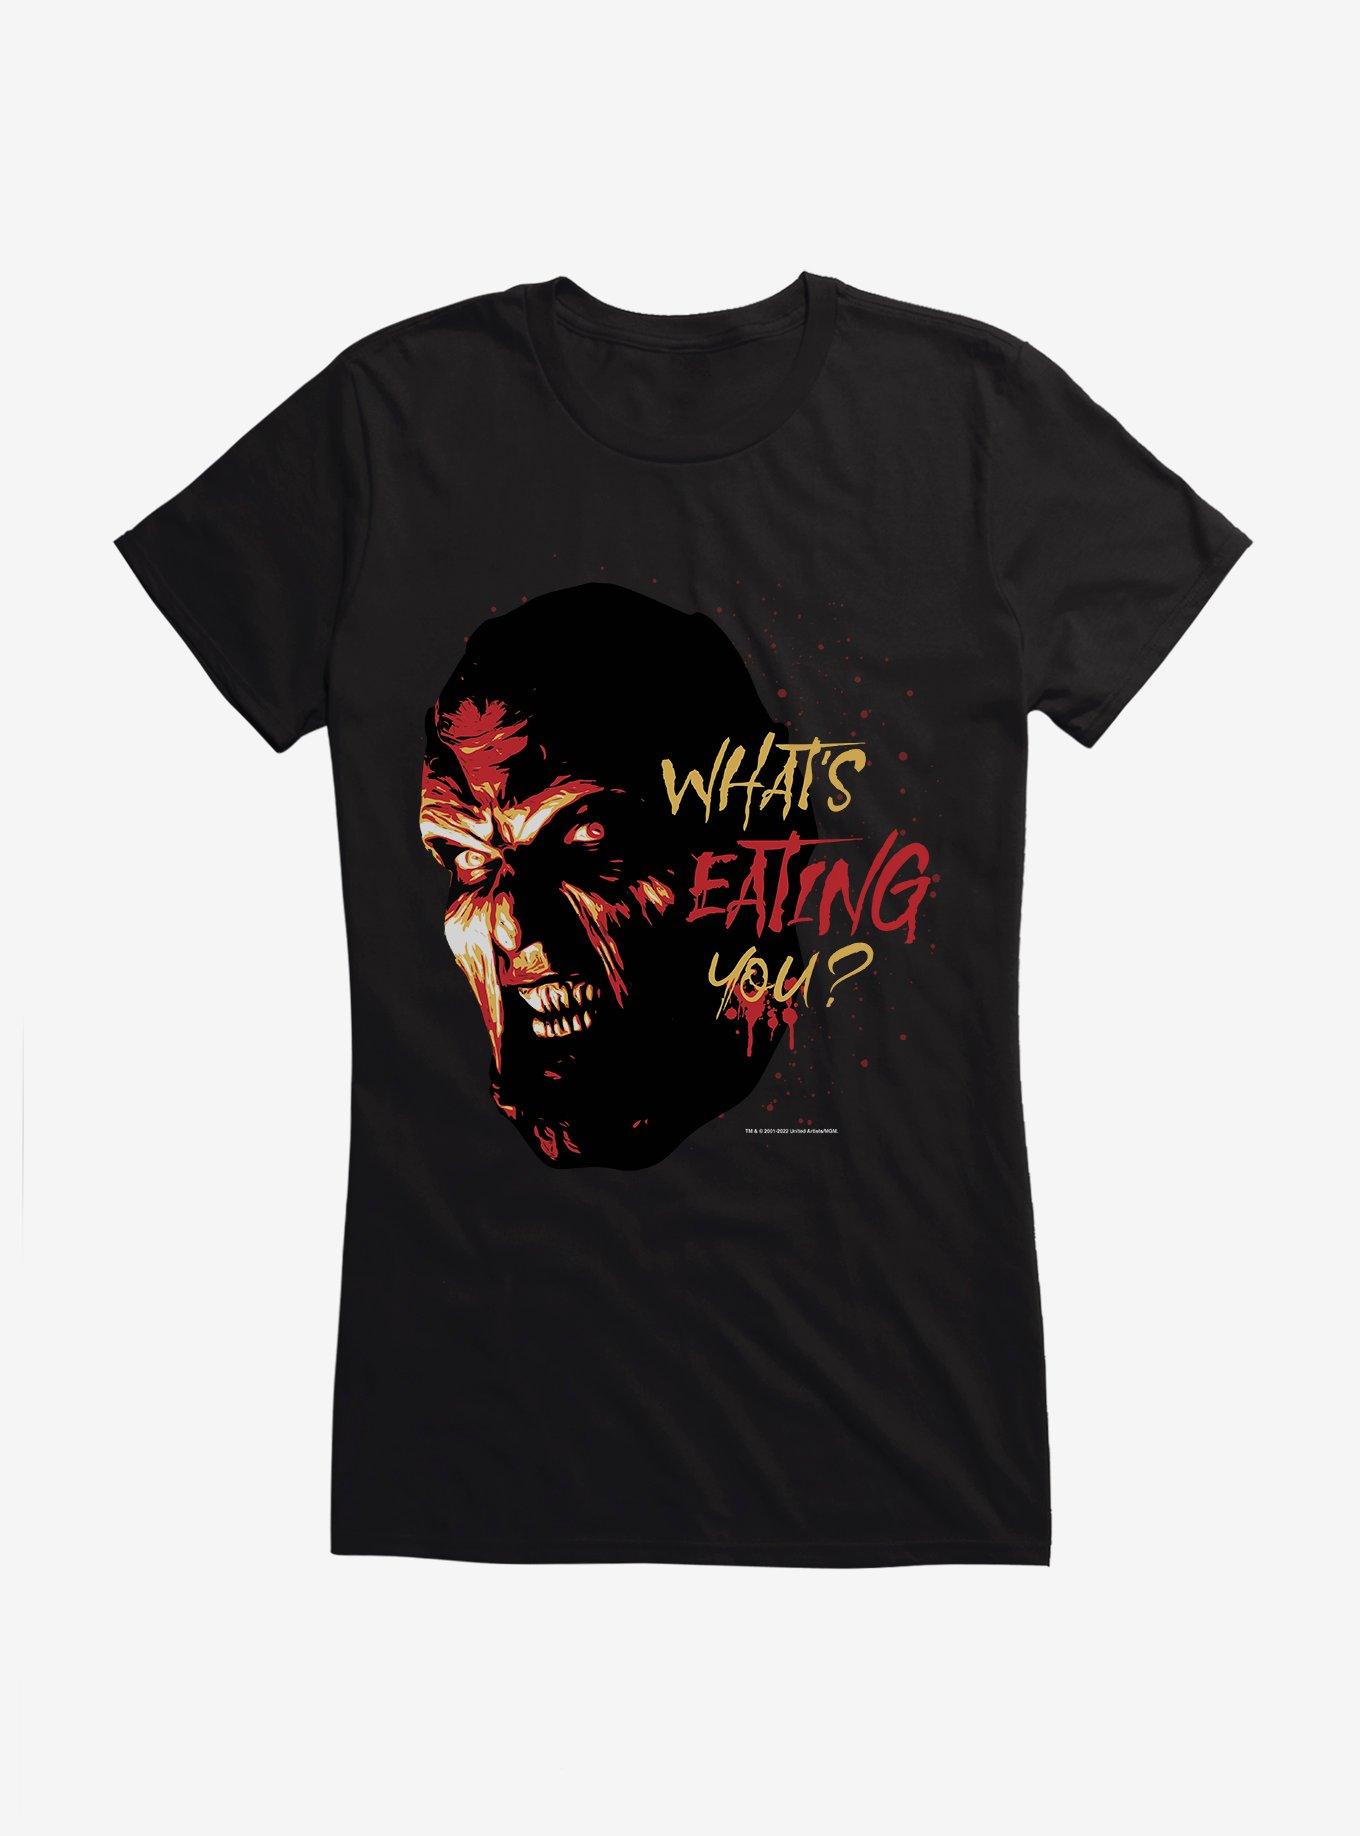 Jeepers Creepers What's Eating You? Girls T-Shirt